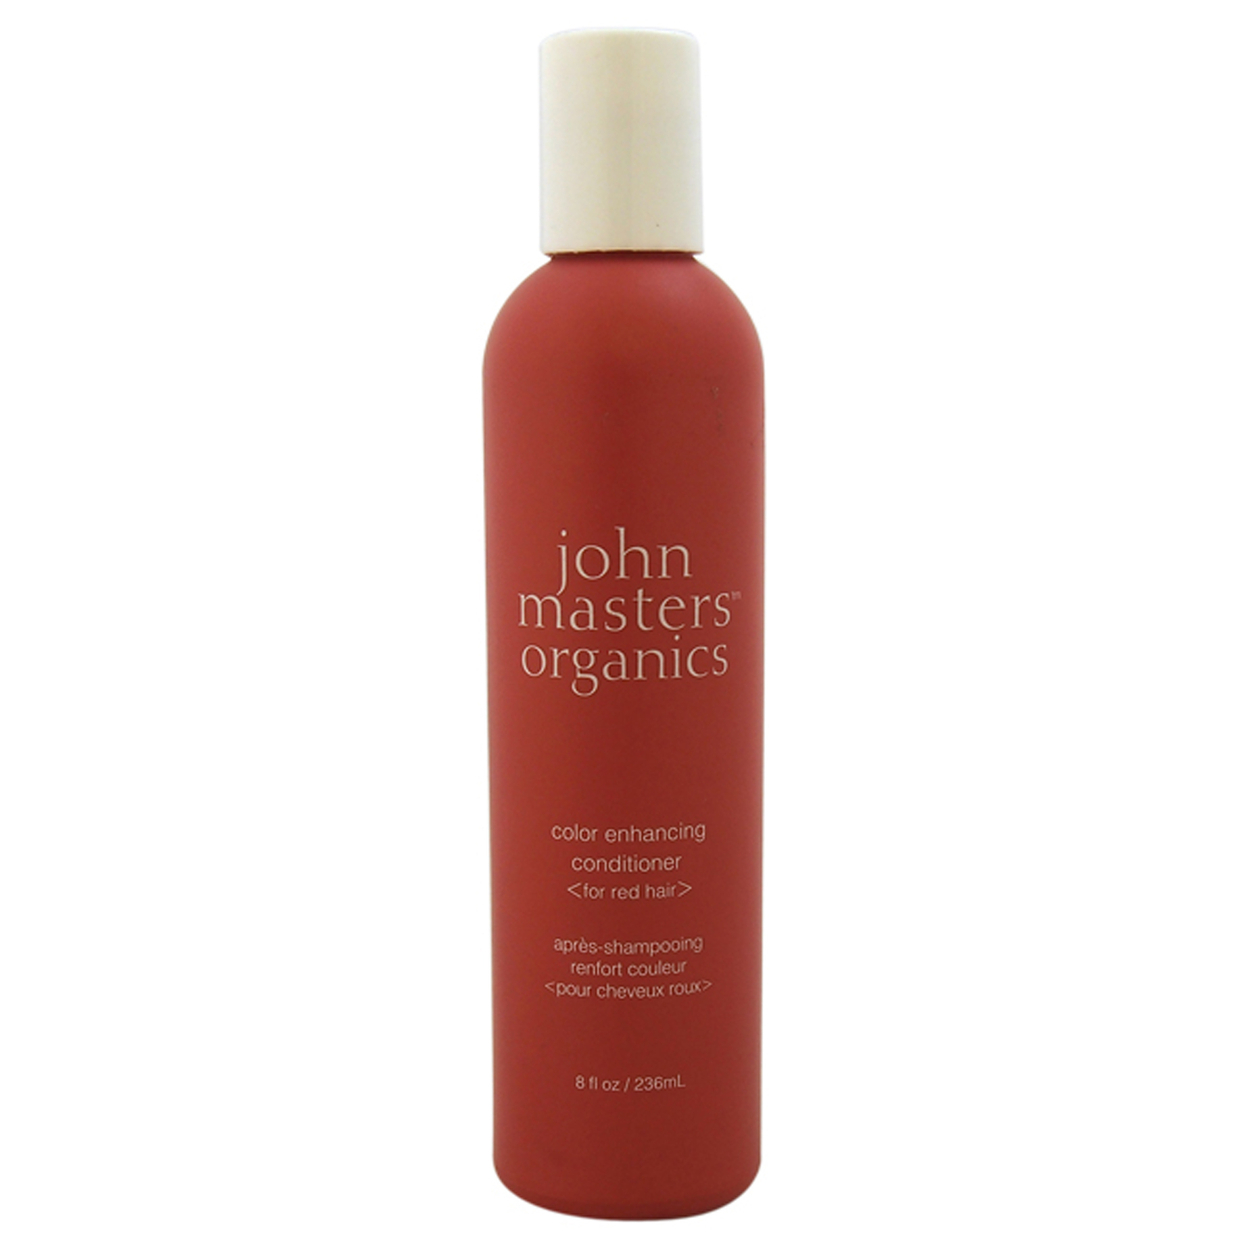 John Masters Organics Unisex HAIRCARE Color Enhancing Conditioner - Red 8 Oz